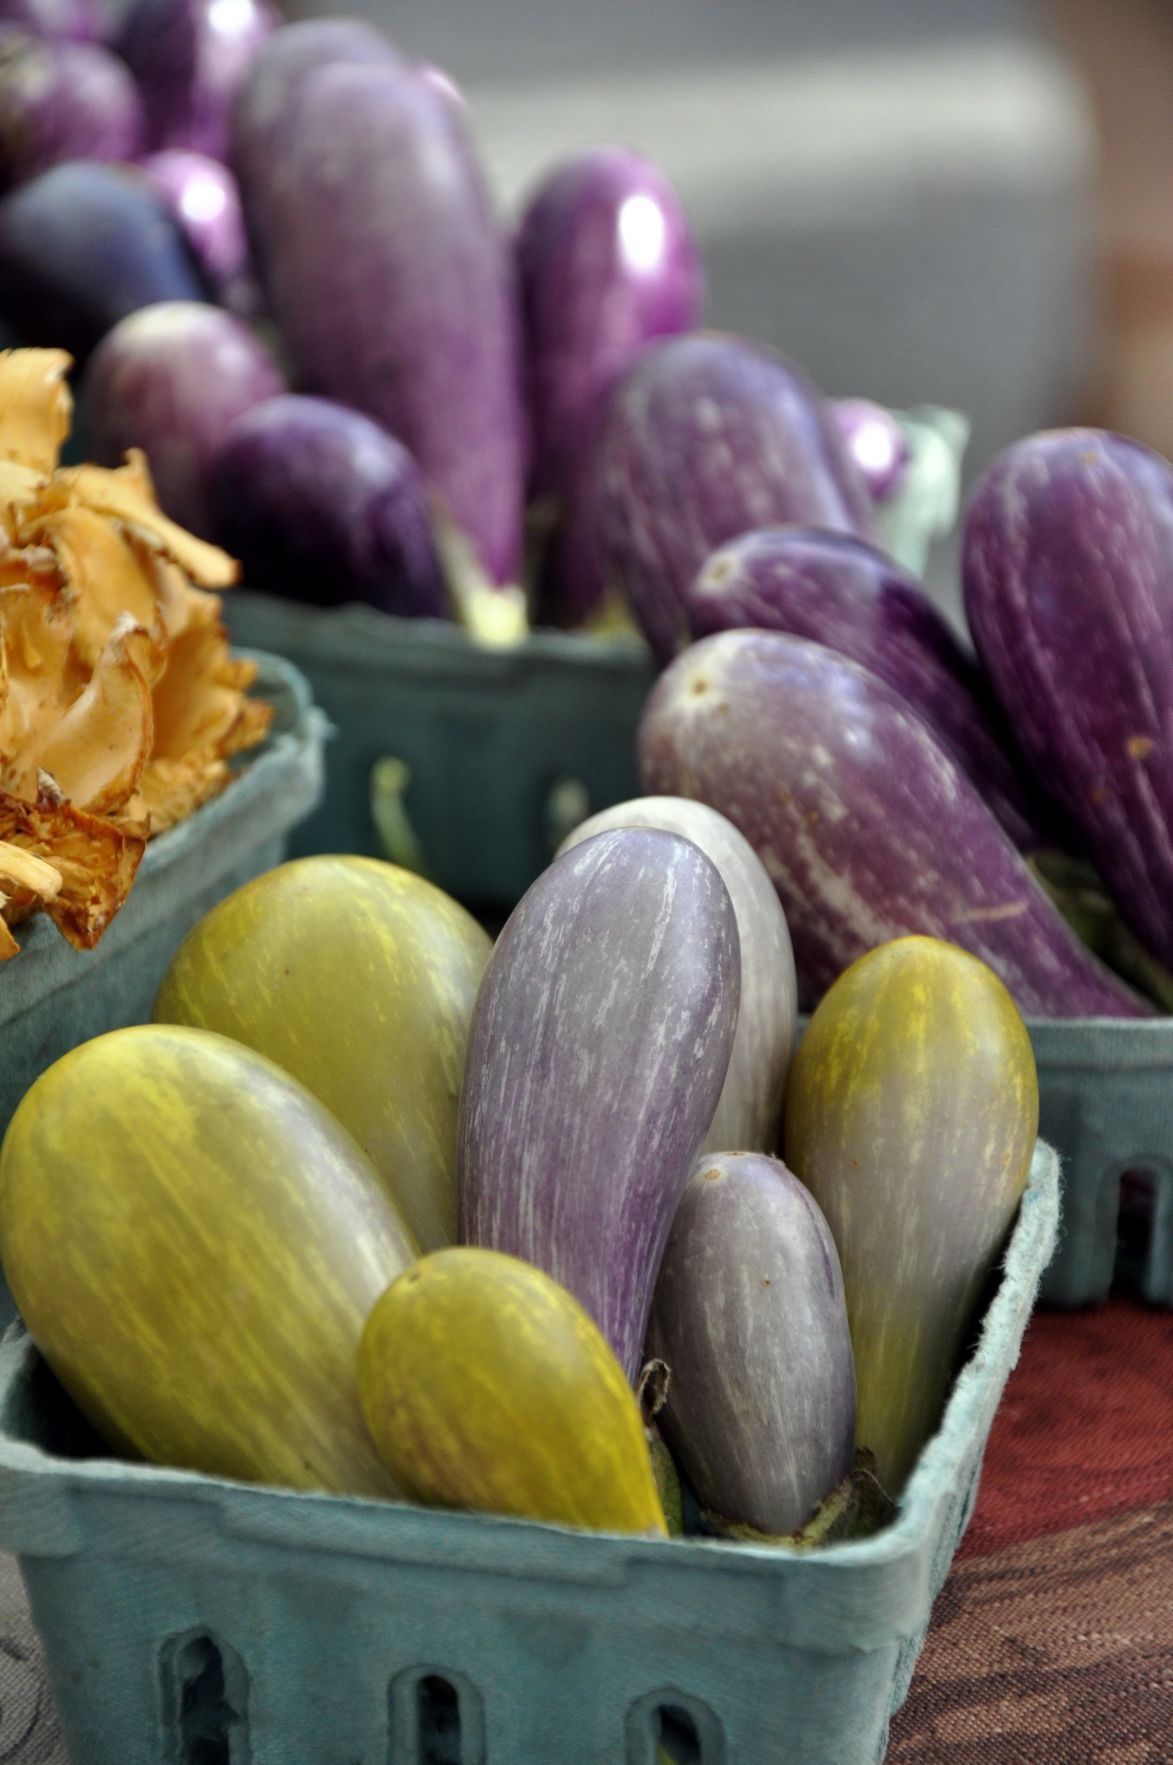 Where to find farmers markets in the St. Louis area | Food and cooking | www.waterandnature.org